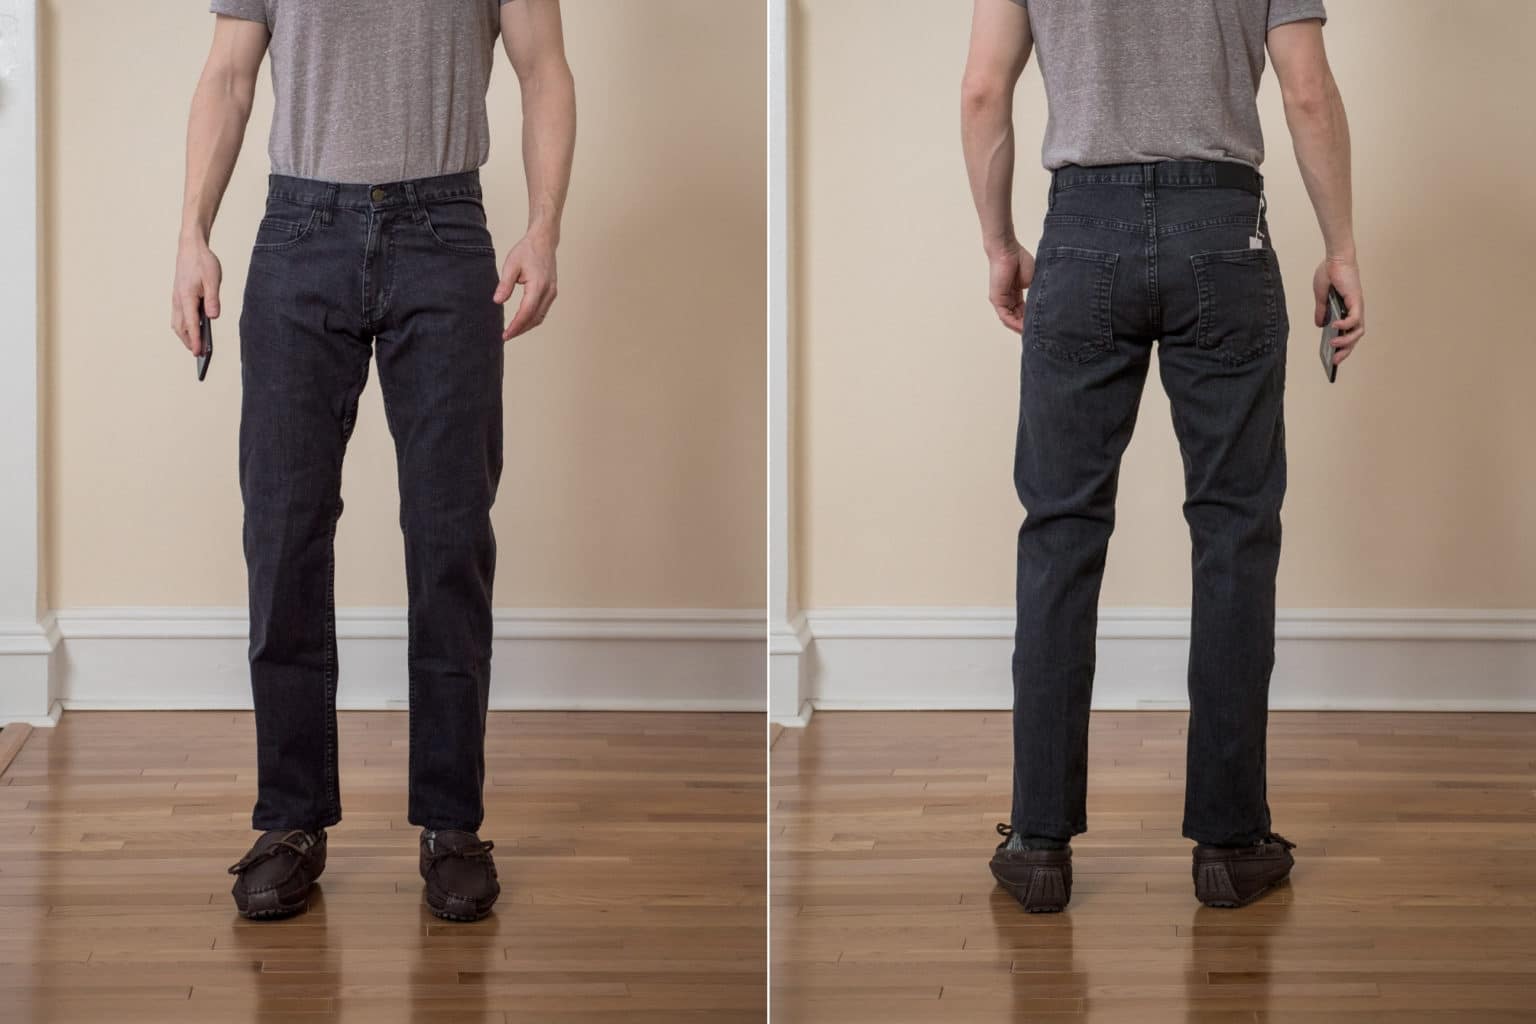 Dearborn Denim Review: Affordable Made-in-USA Jeans